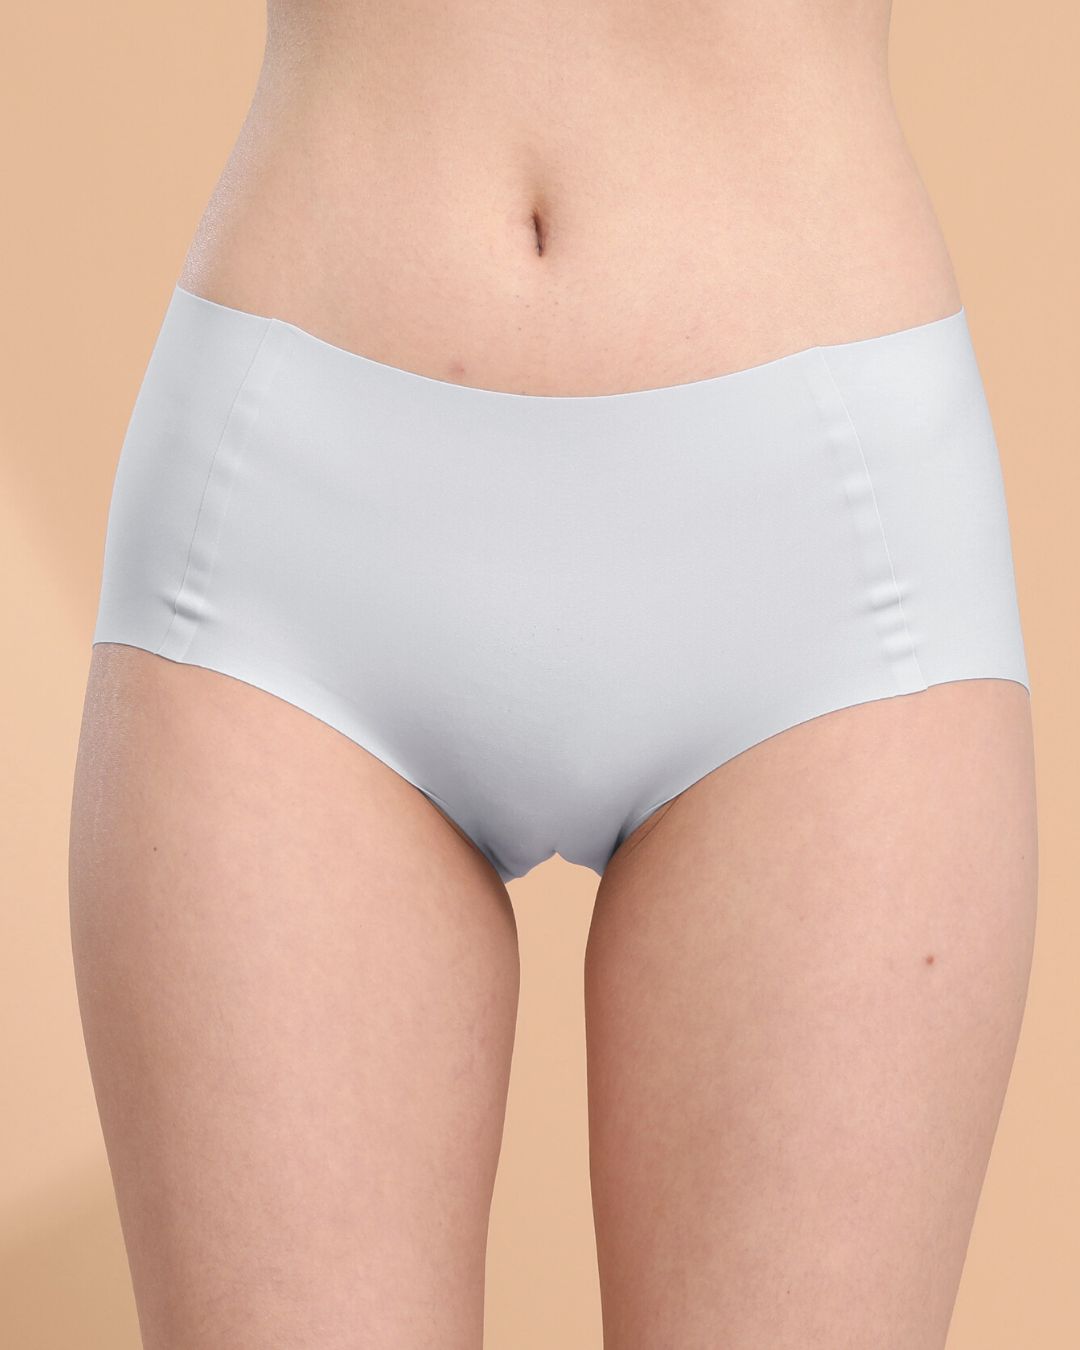 Buy Second Skin Seamless Boyshorts by Seamless Lingerie